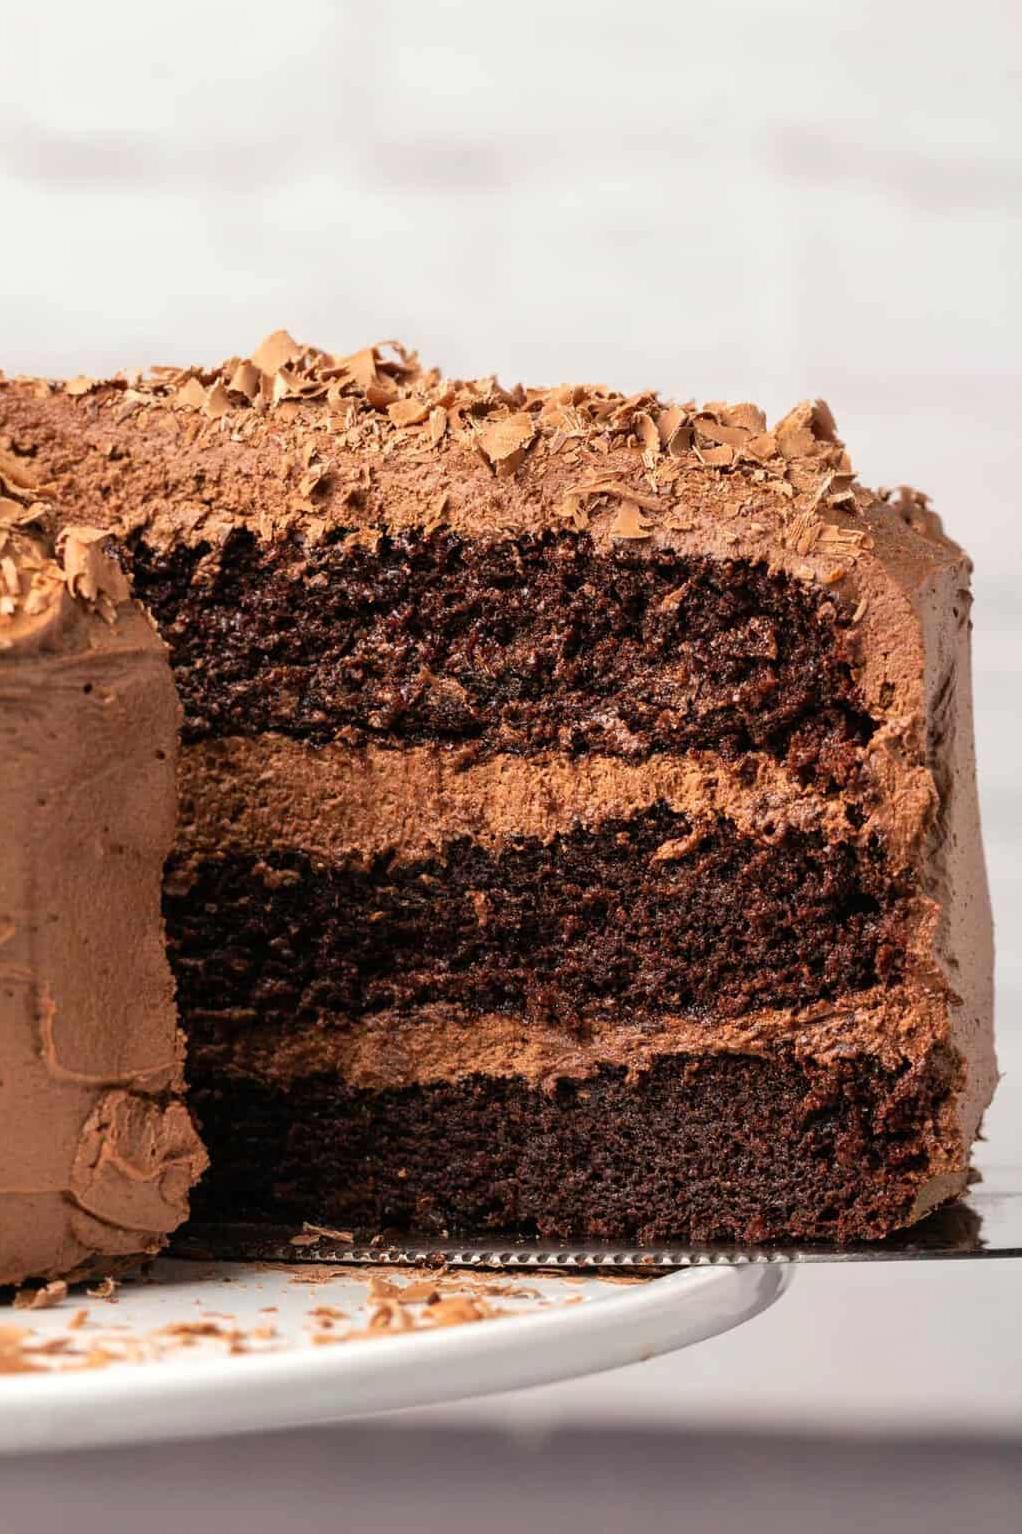  Who says no to chocolate cake? (Especially when it's egg-free and dairy-free)